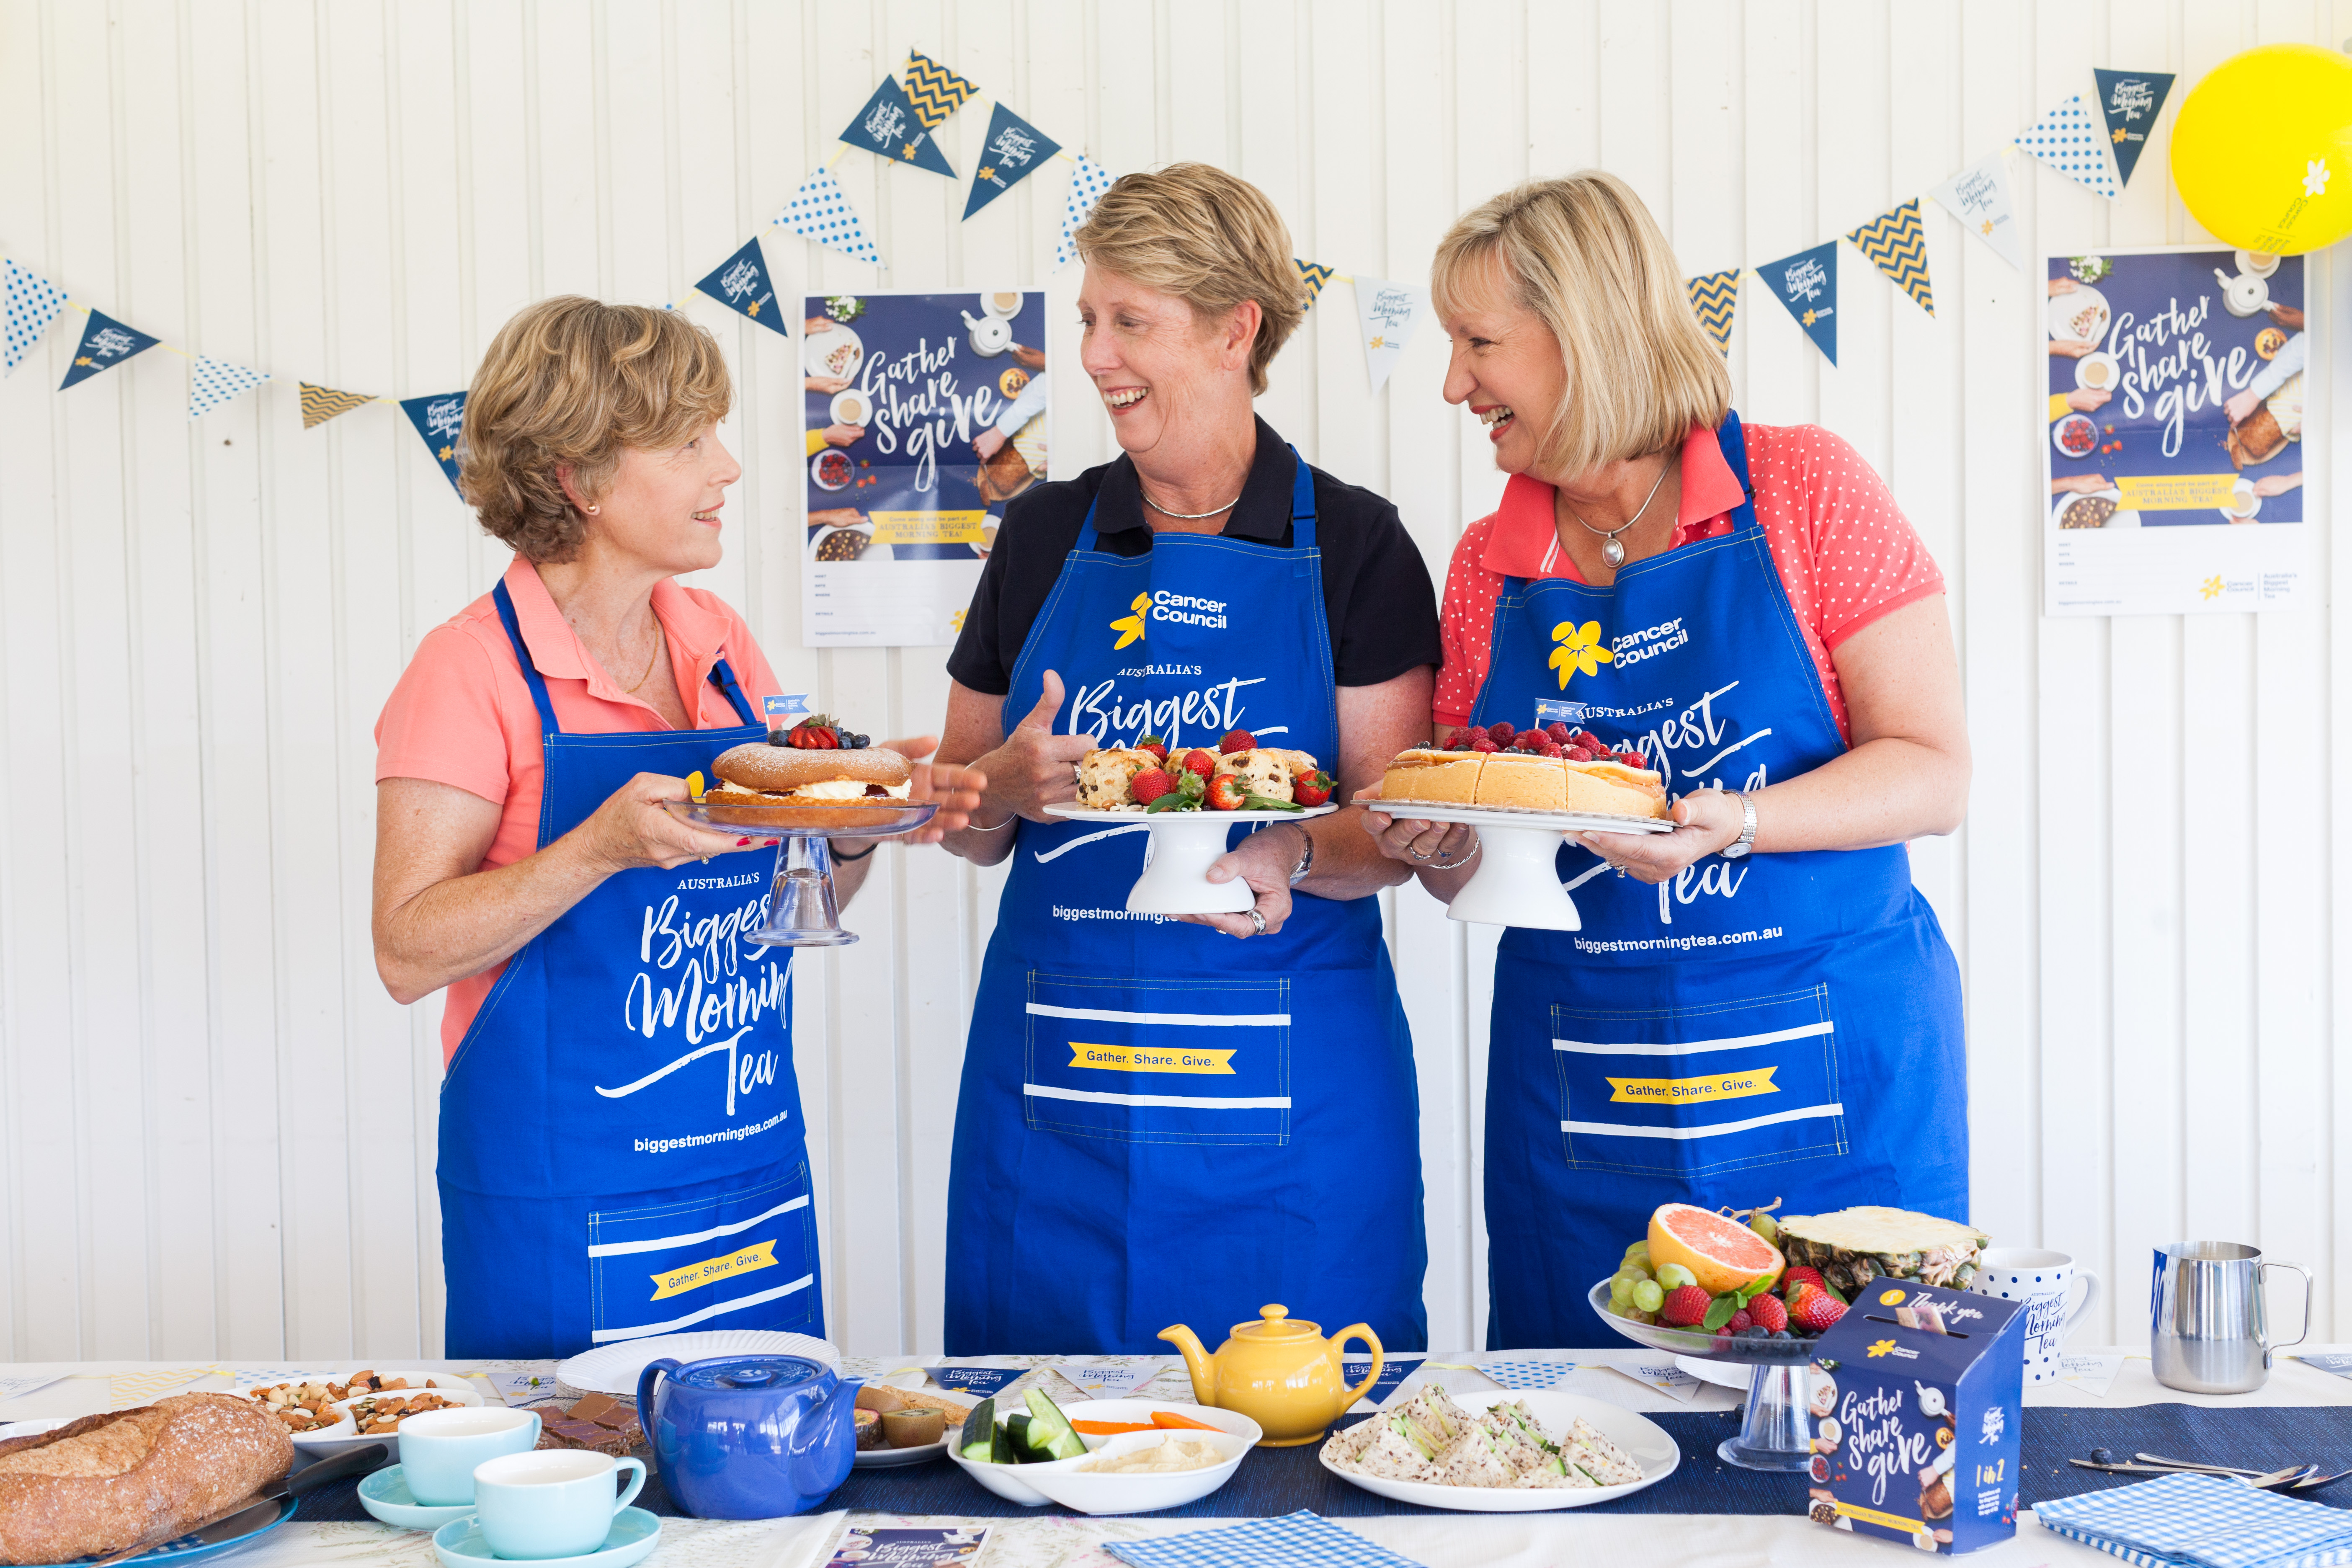 women holding cakes and scones and talking happily. three women hosting a morning tea.